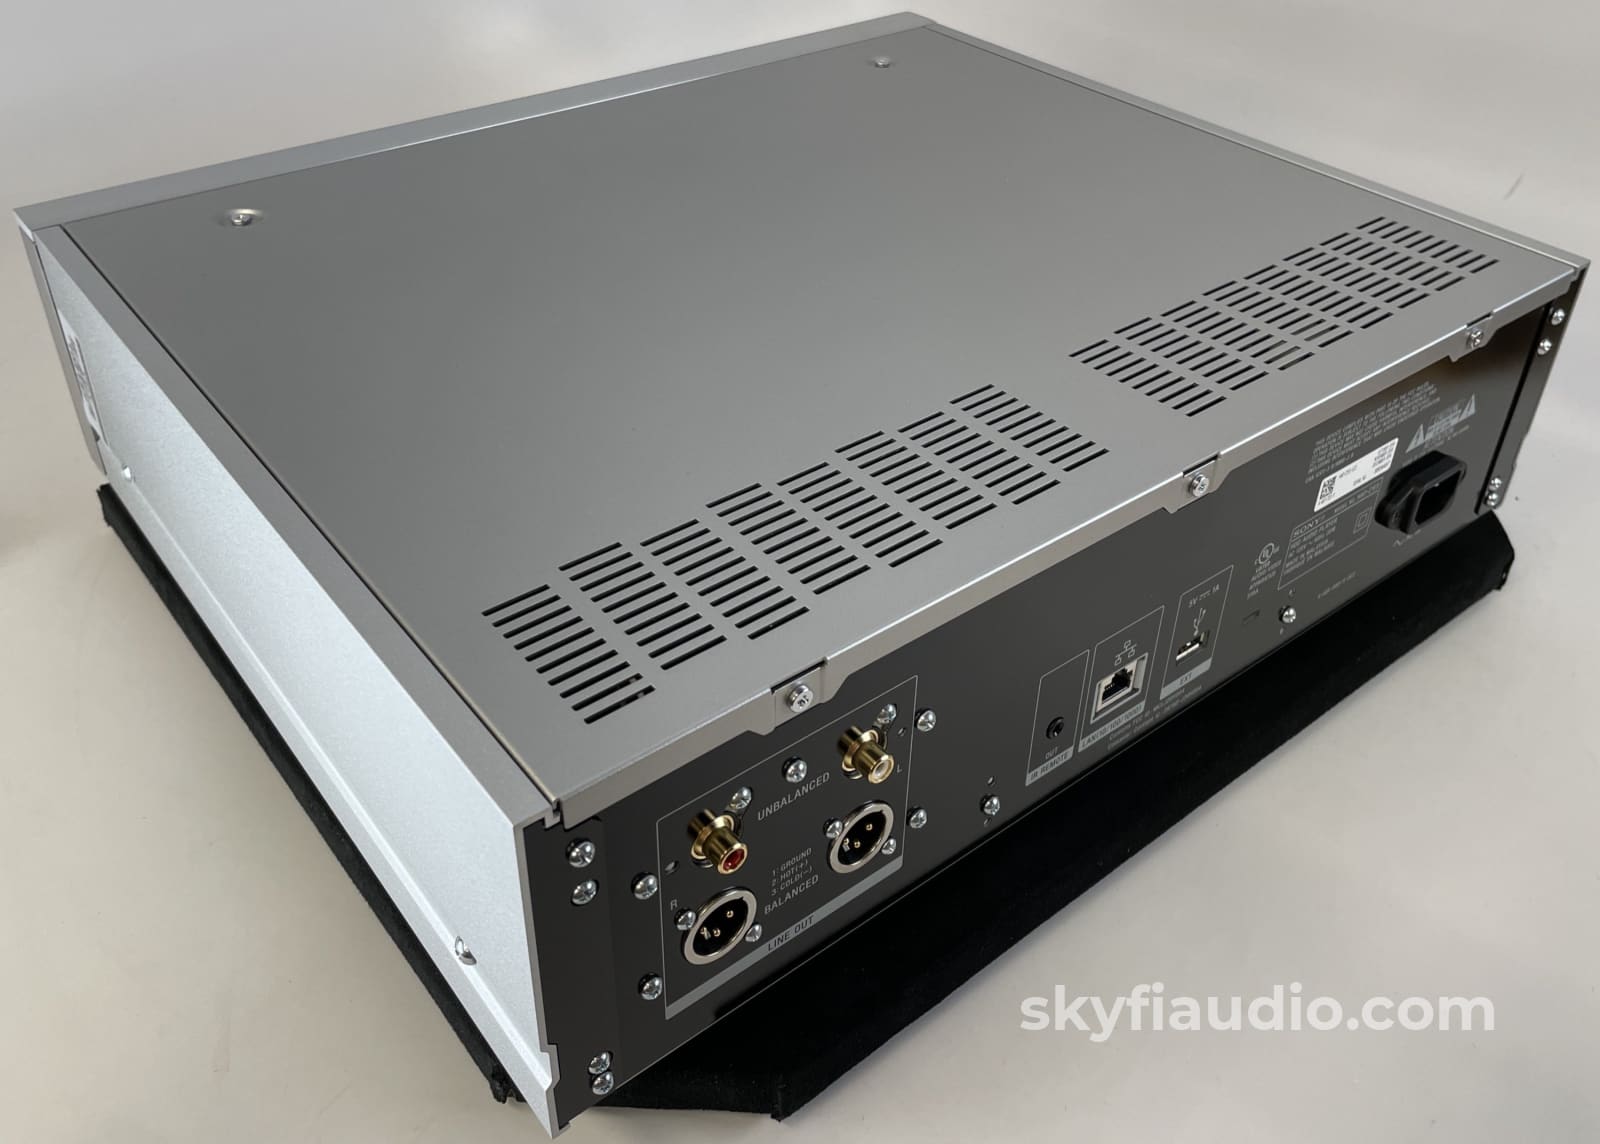 Sony HAP-Z1ES High-Resolution Audio HDD & Network Player - Loaded with